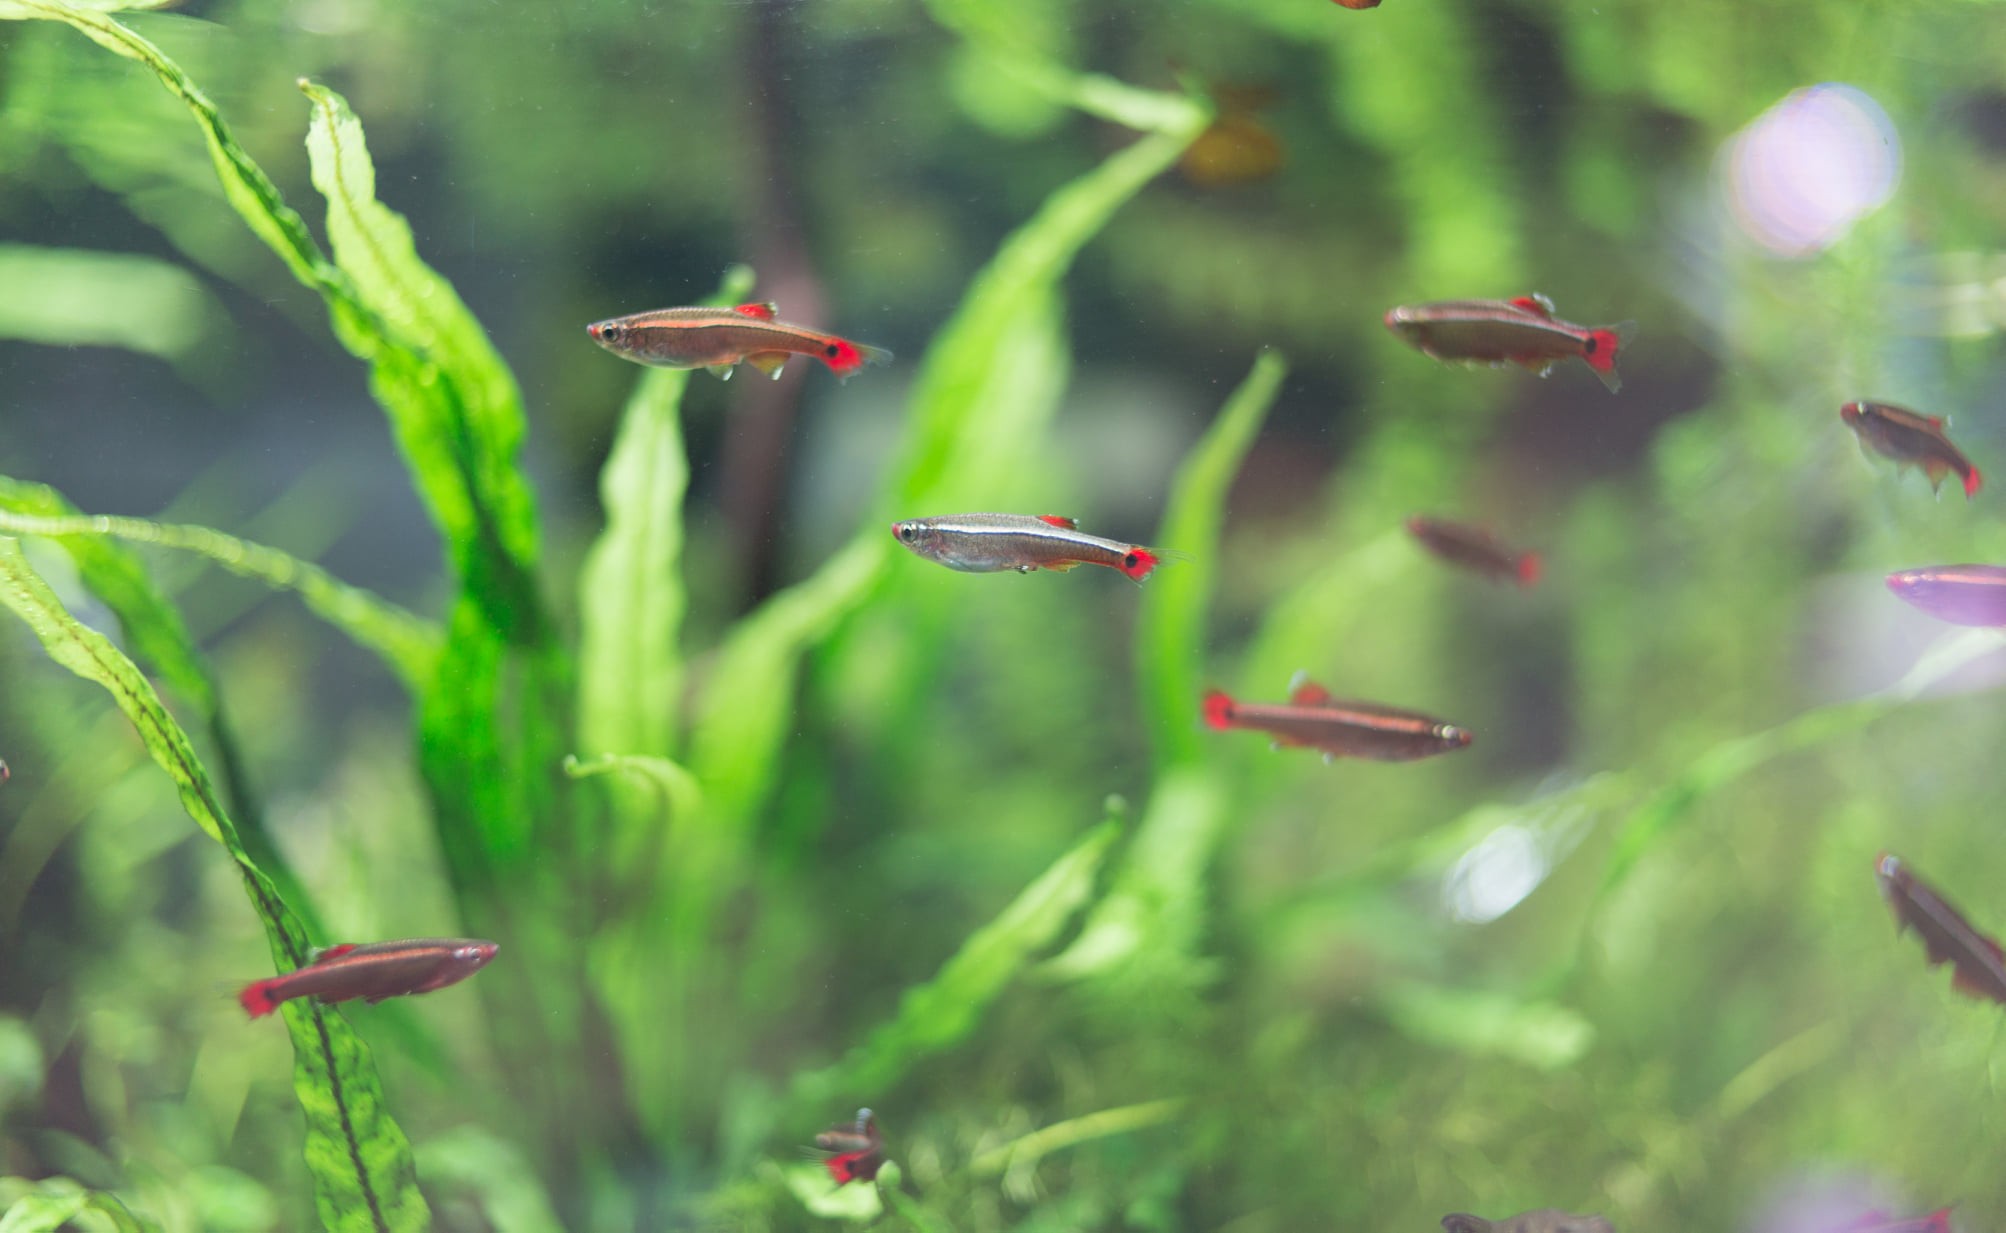 White Cloud Mountain Minnow Care: How to Keep These Fish Happy and